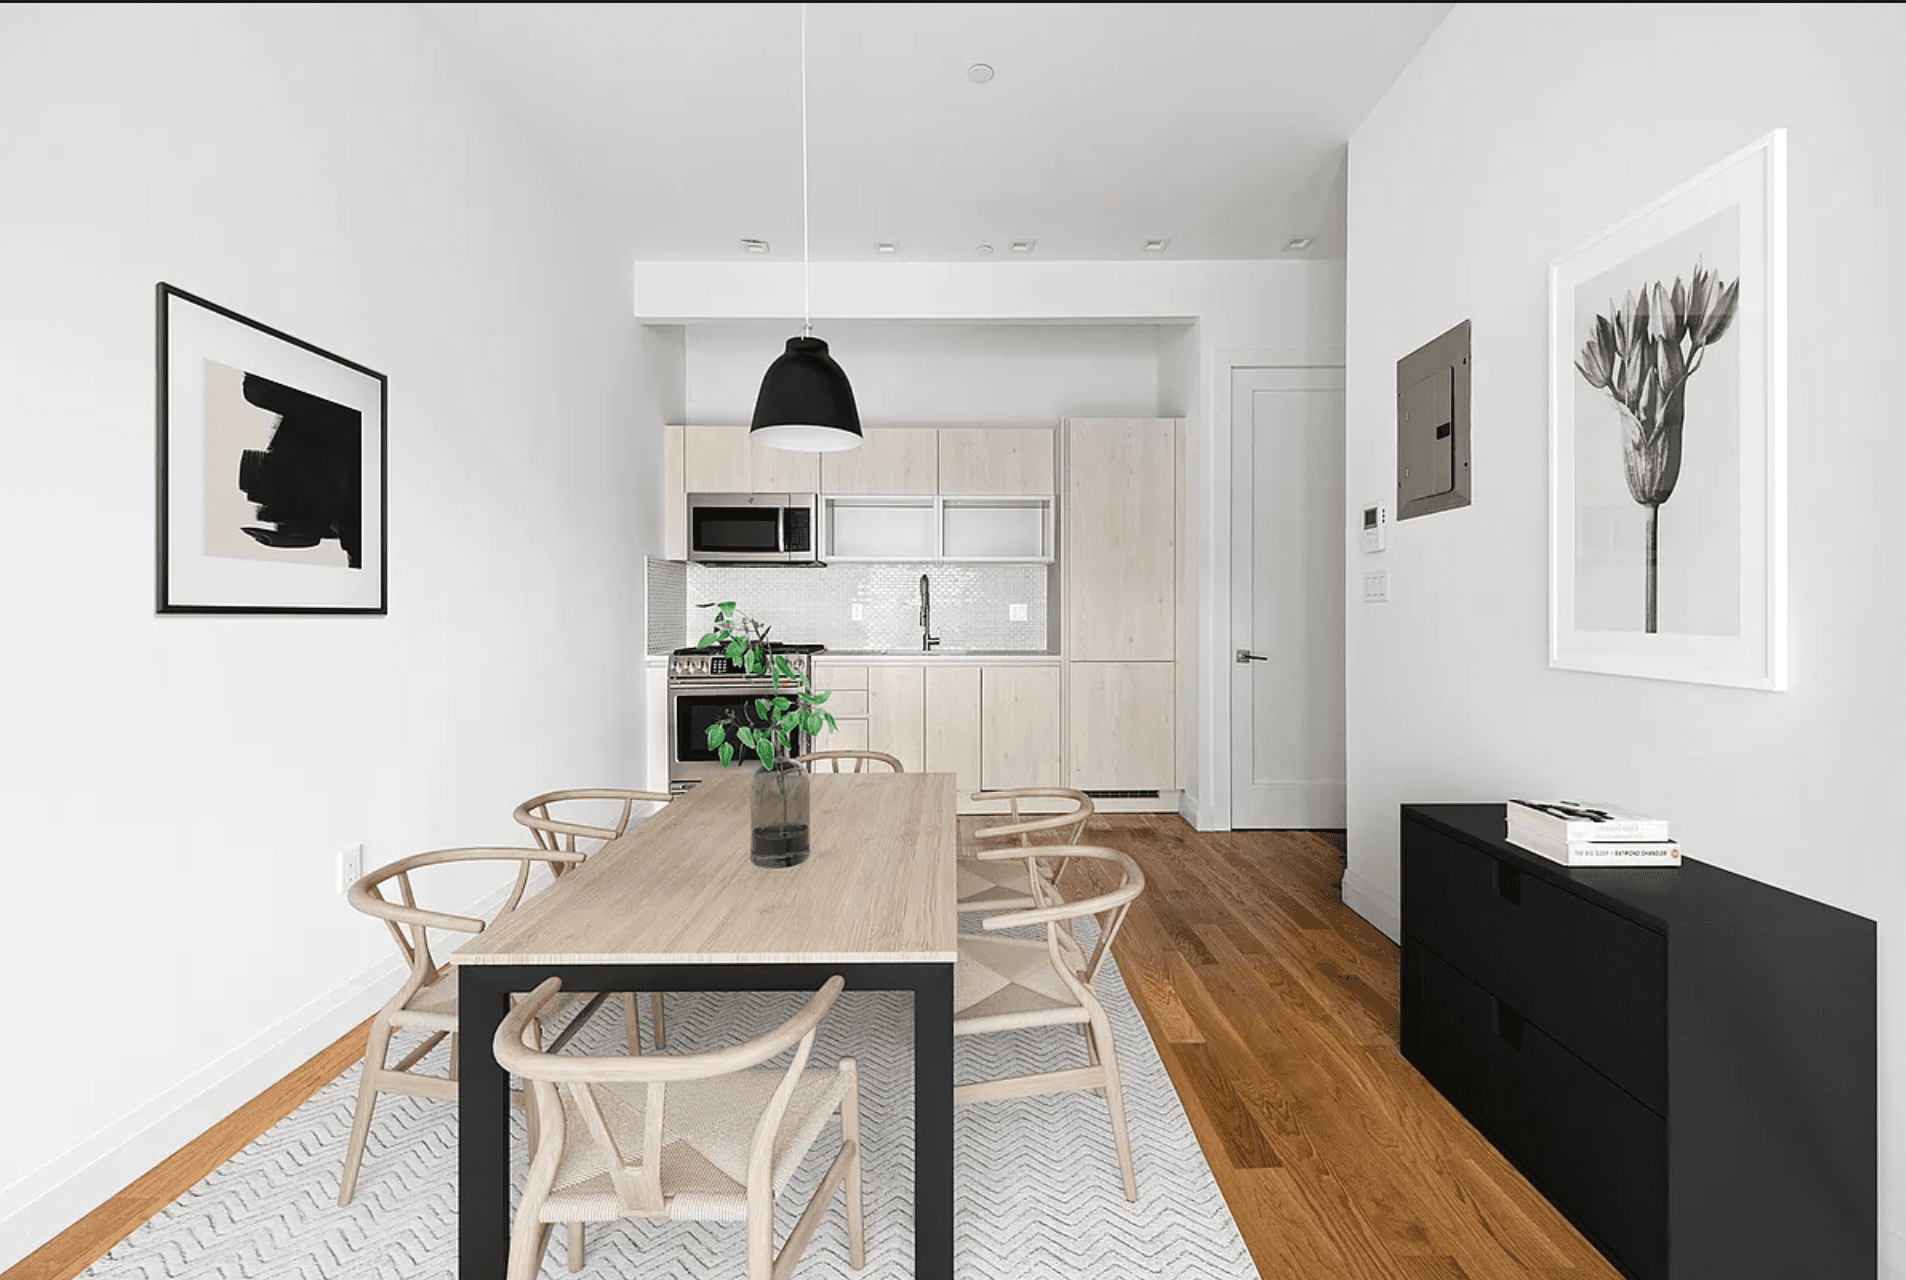 A Unique Collection of 7 Boutique Condominiums Located On A Quiet Street In Bushwick